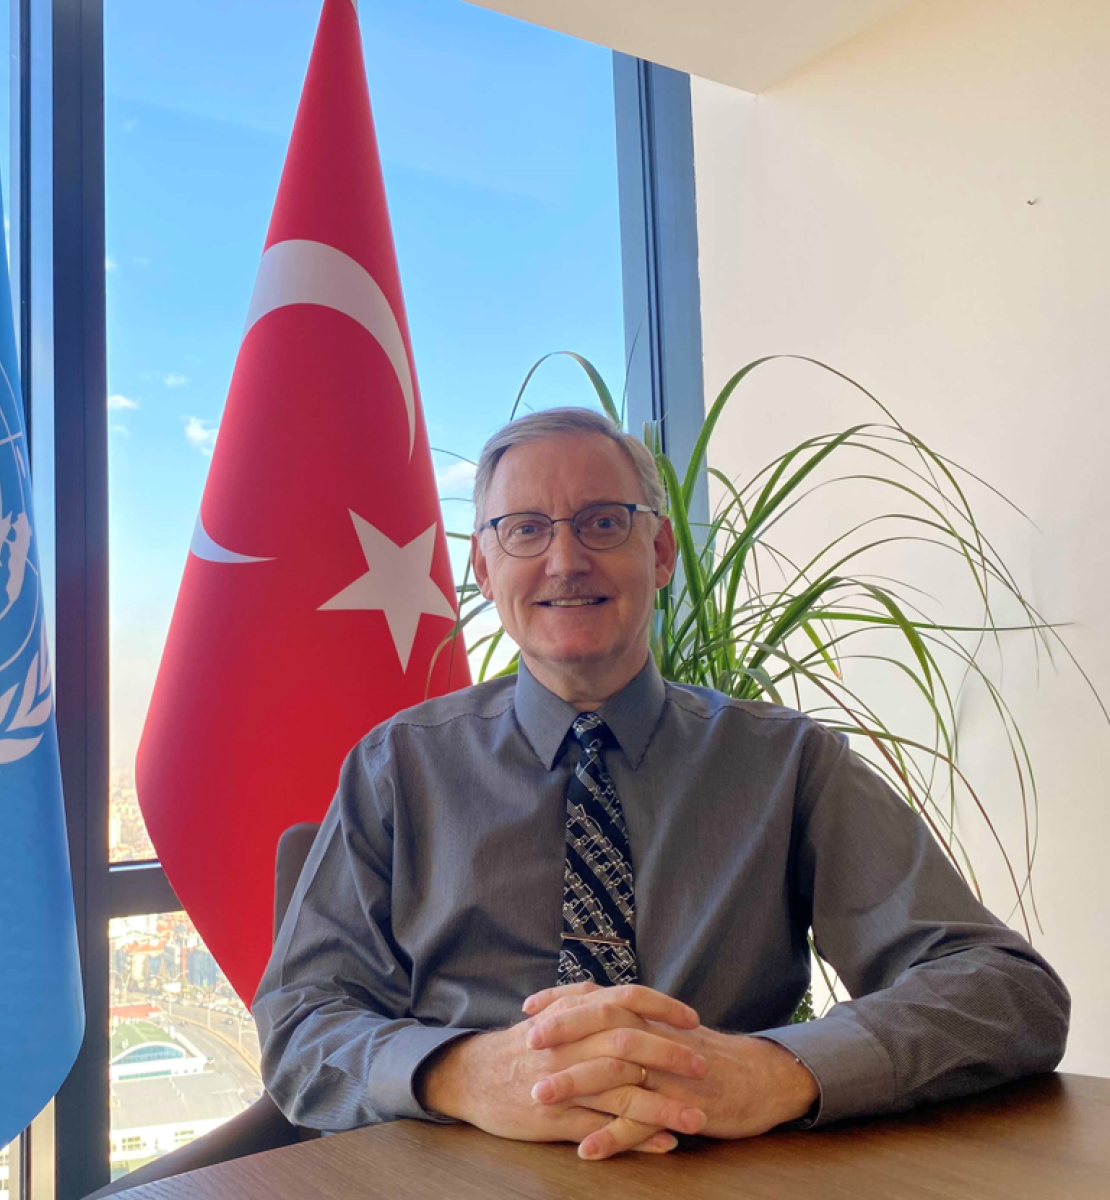 Official photo of the newly appointed Resident Coordinator for Turkey, Alvaro Rodriguez. He sits at a desk hands folded smiling in front the UN and Turkey flags.